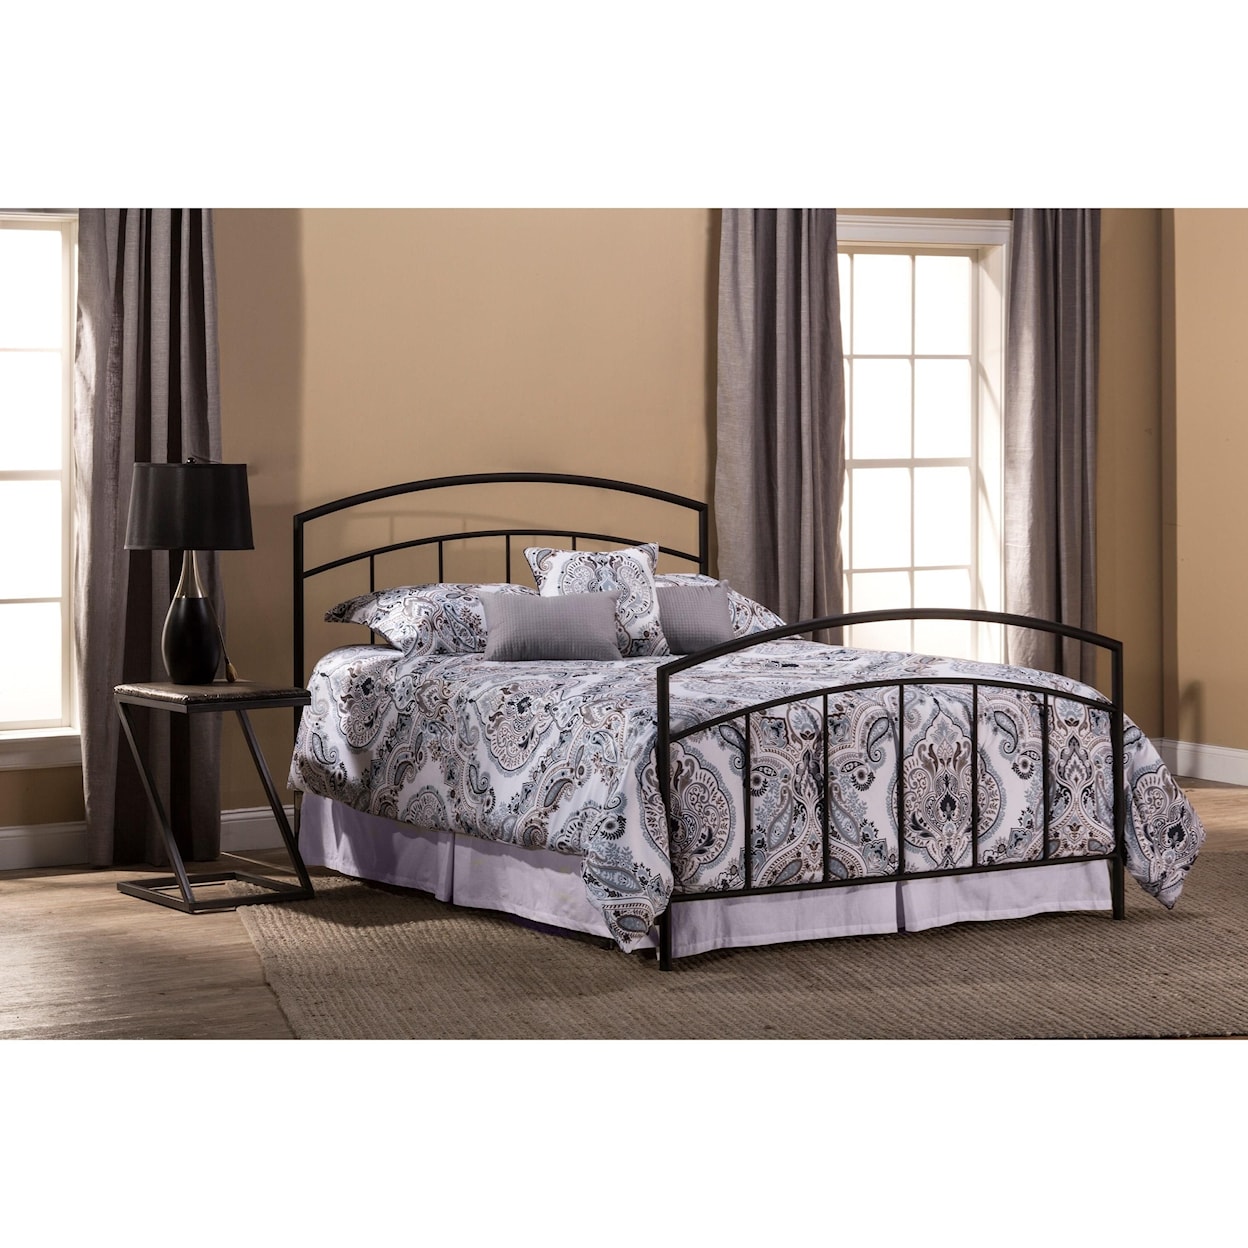 Hillsdale   King Bed Set with Rails